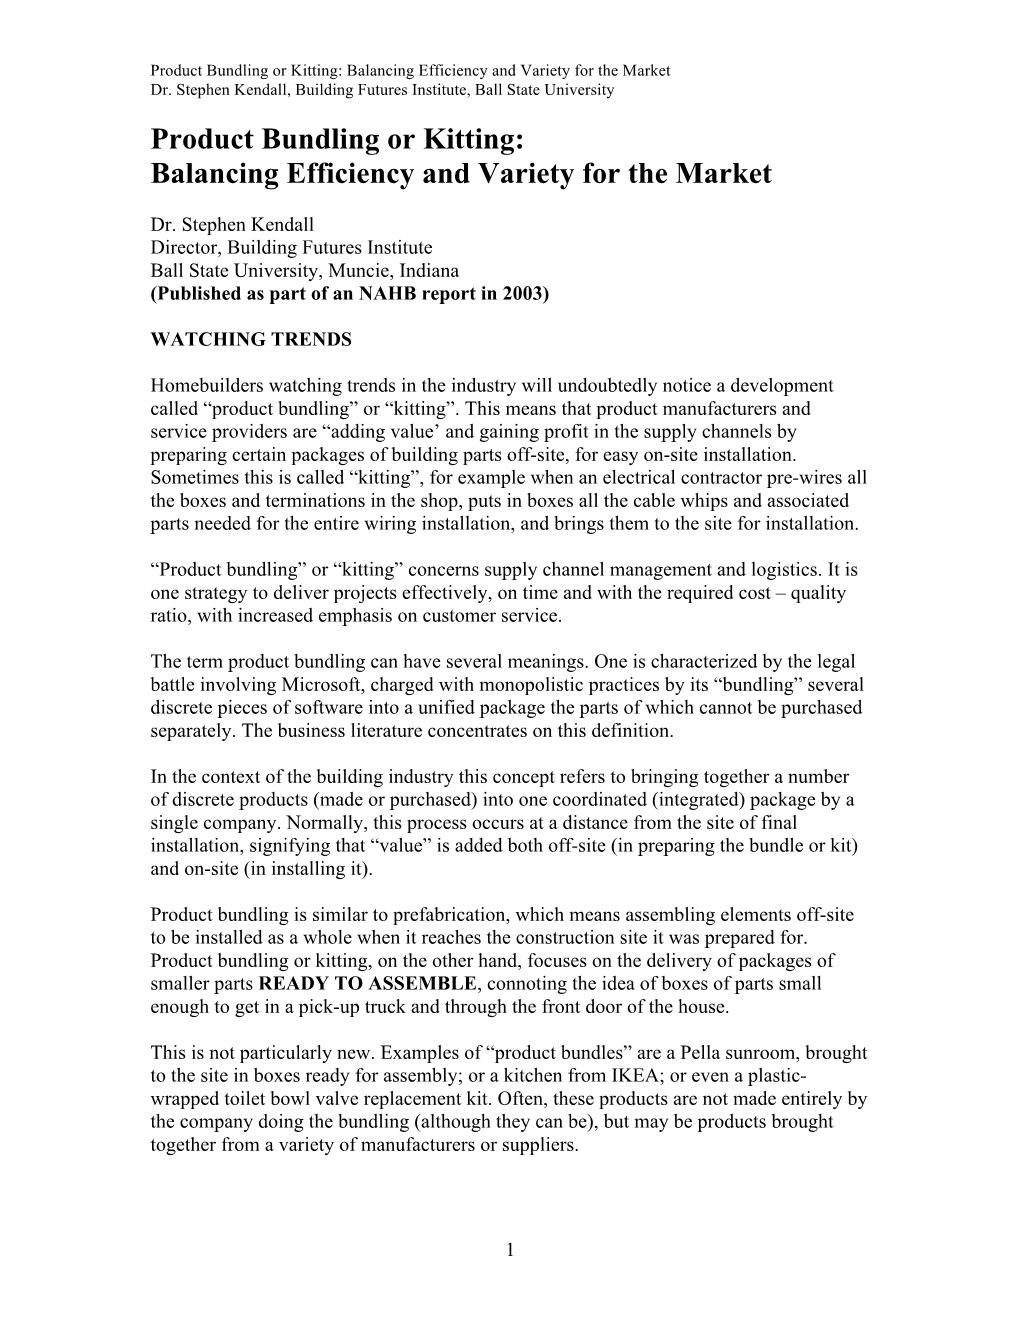 Product Bundling Or Kitting: Balancing Efficiency and Variety for the Market Dr